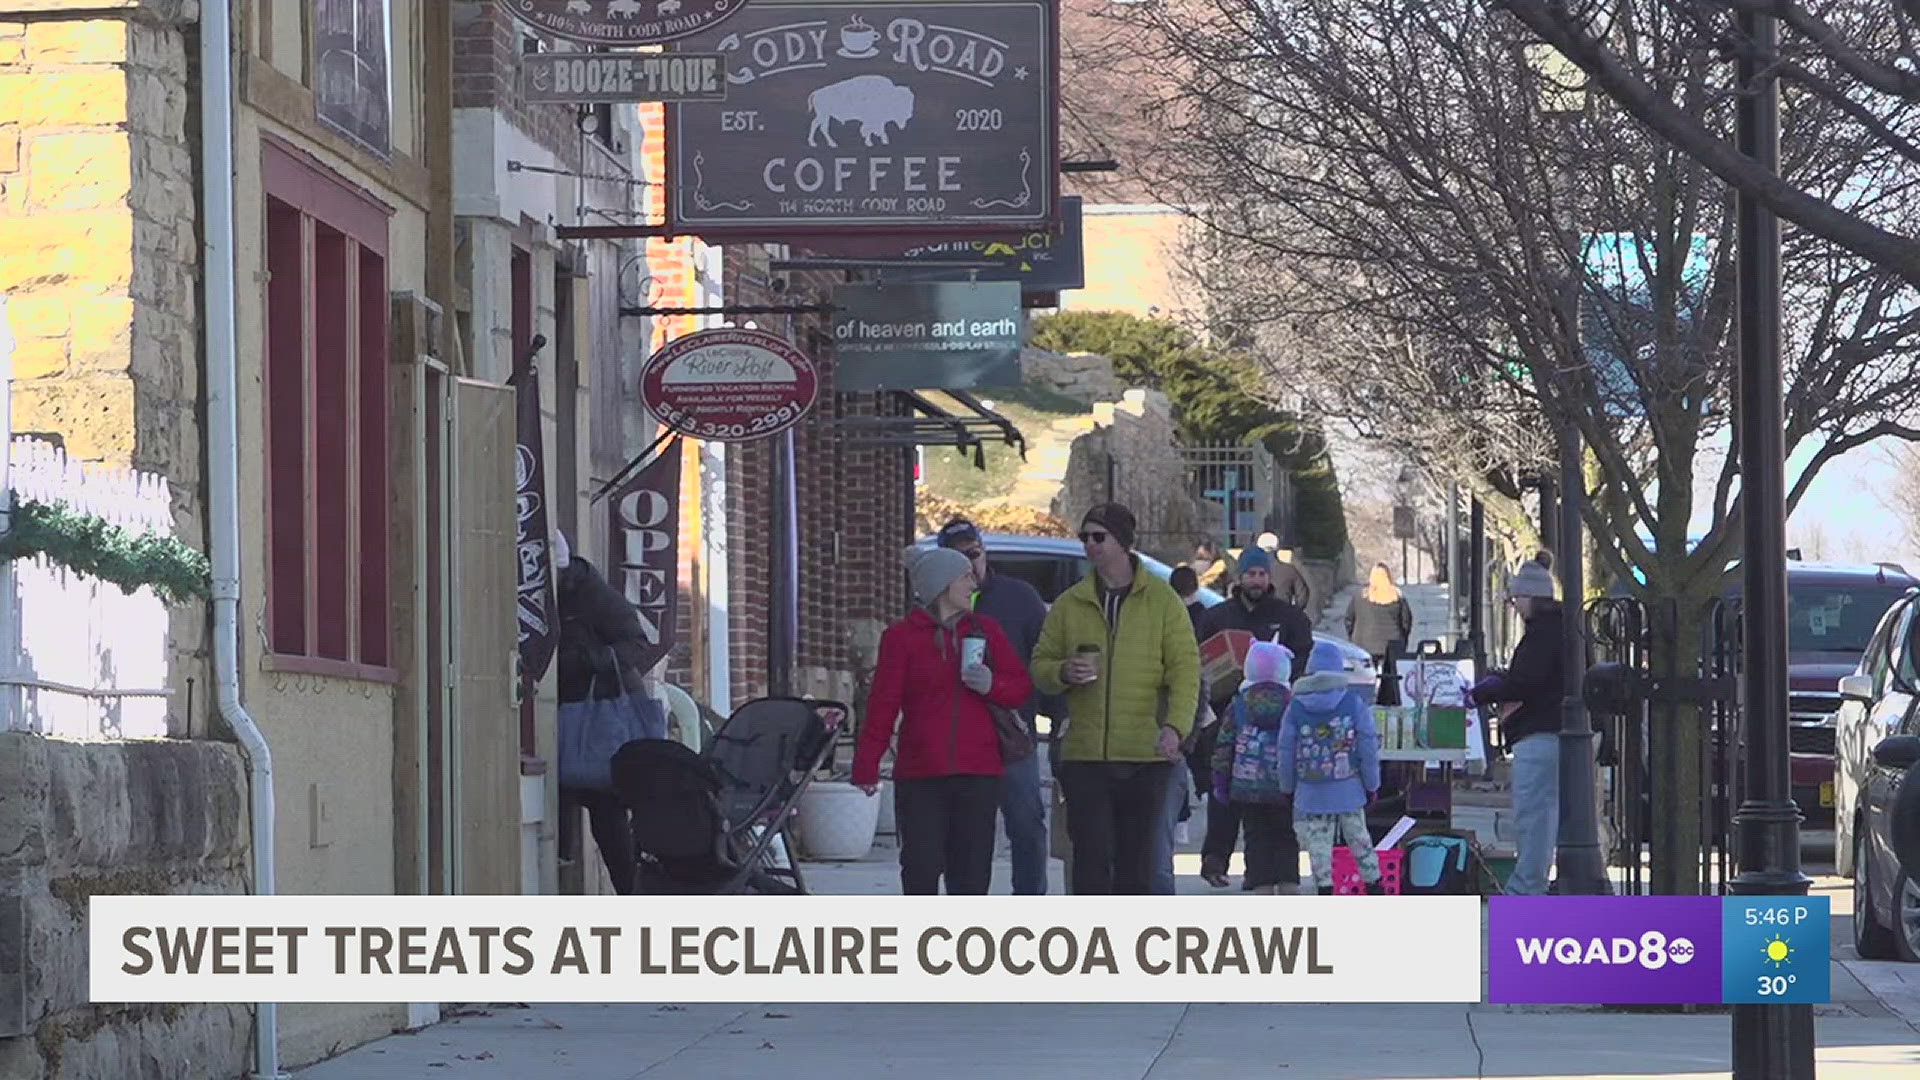 Local businesses offered samples and sales as part of the LeClaire Cocoa Crawl.